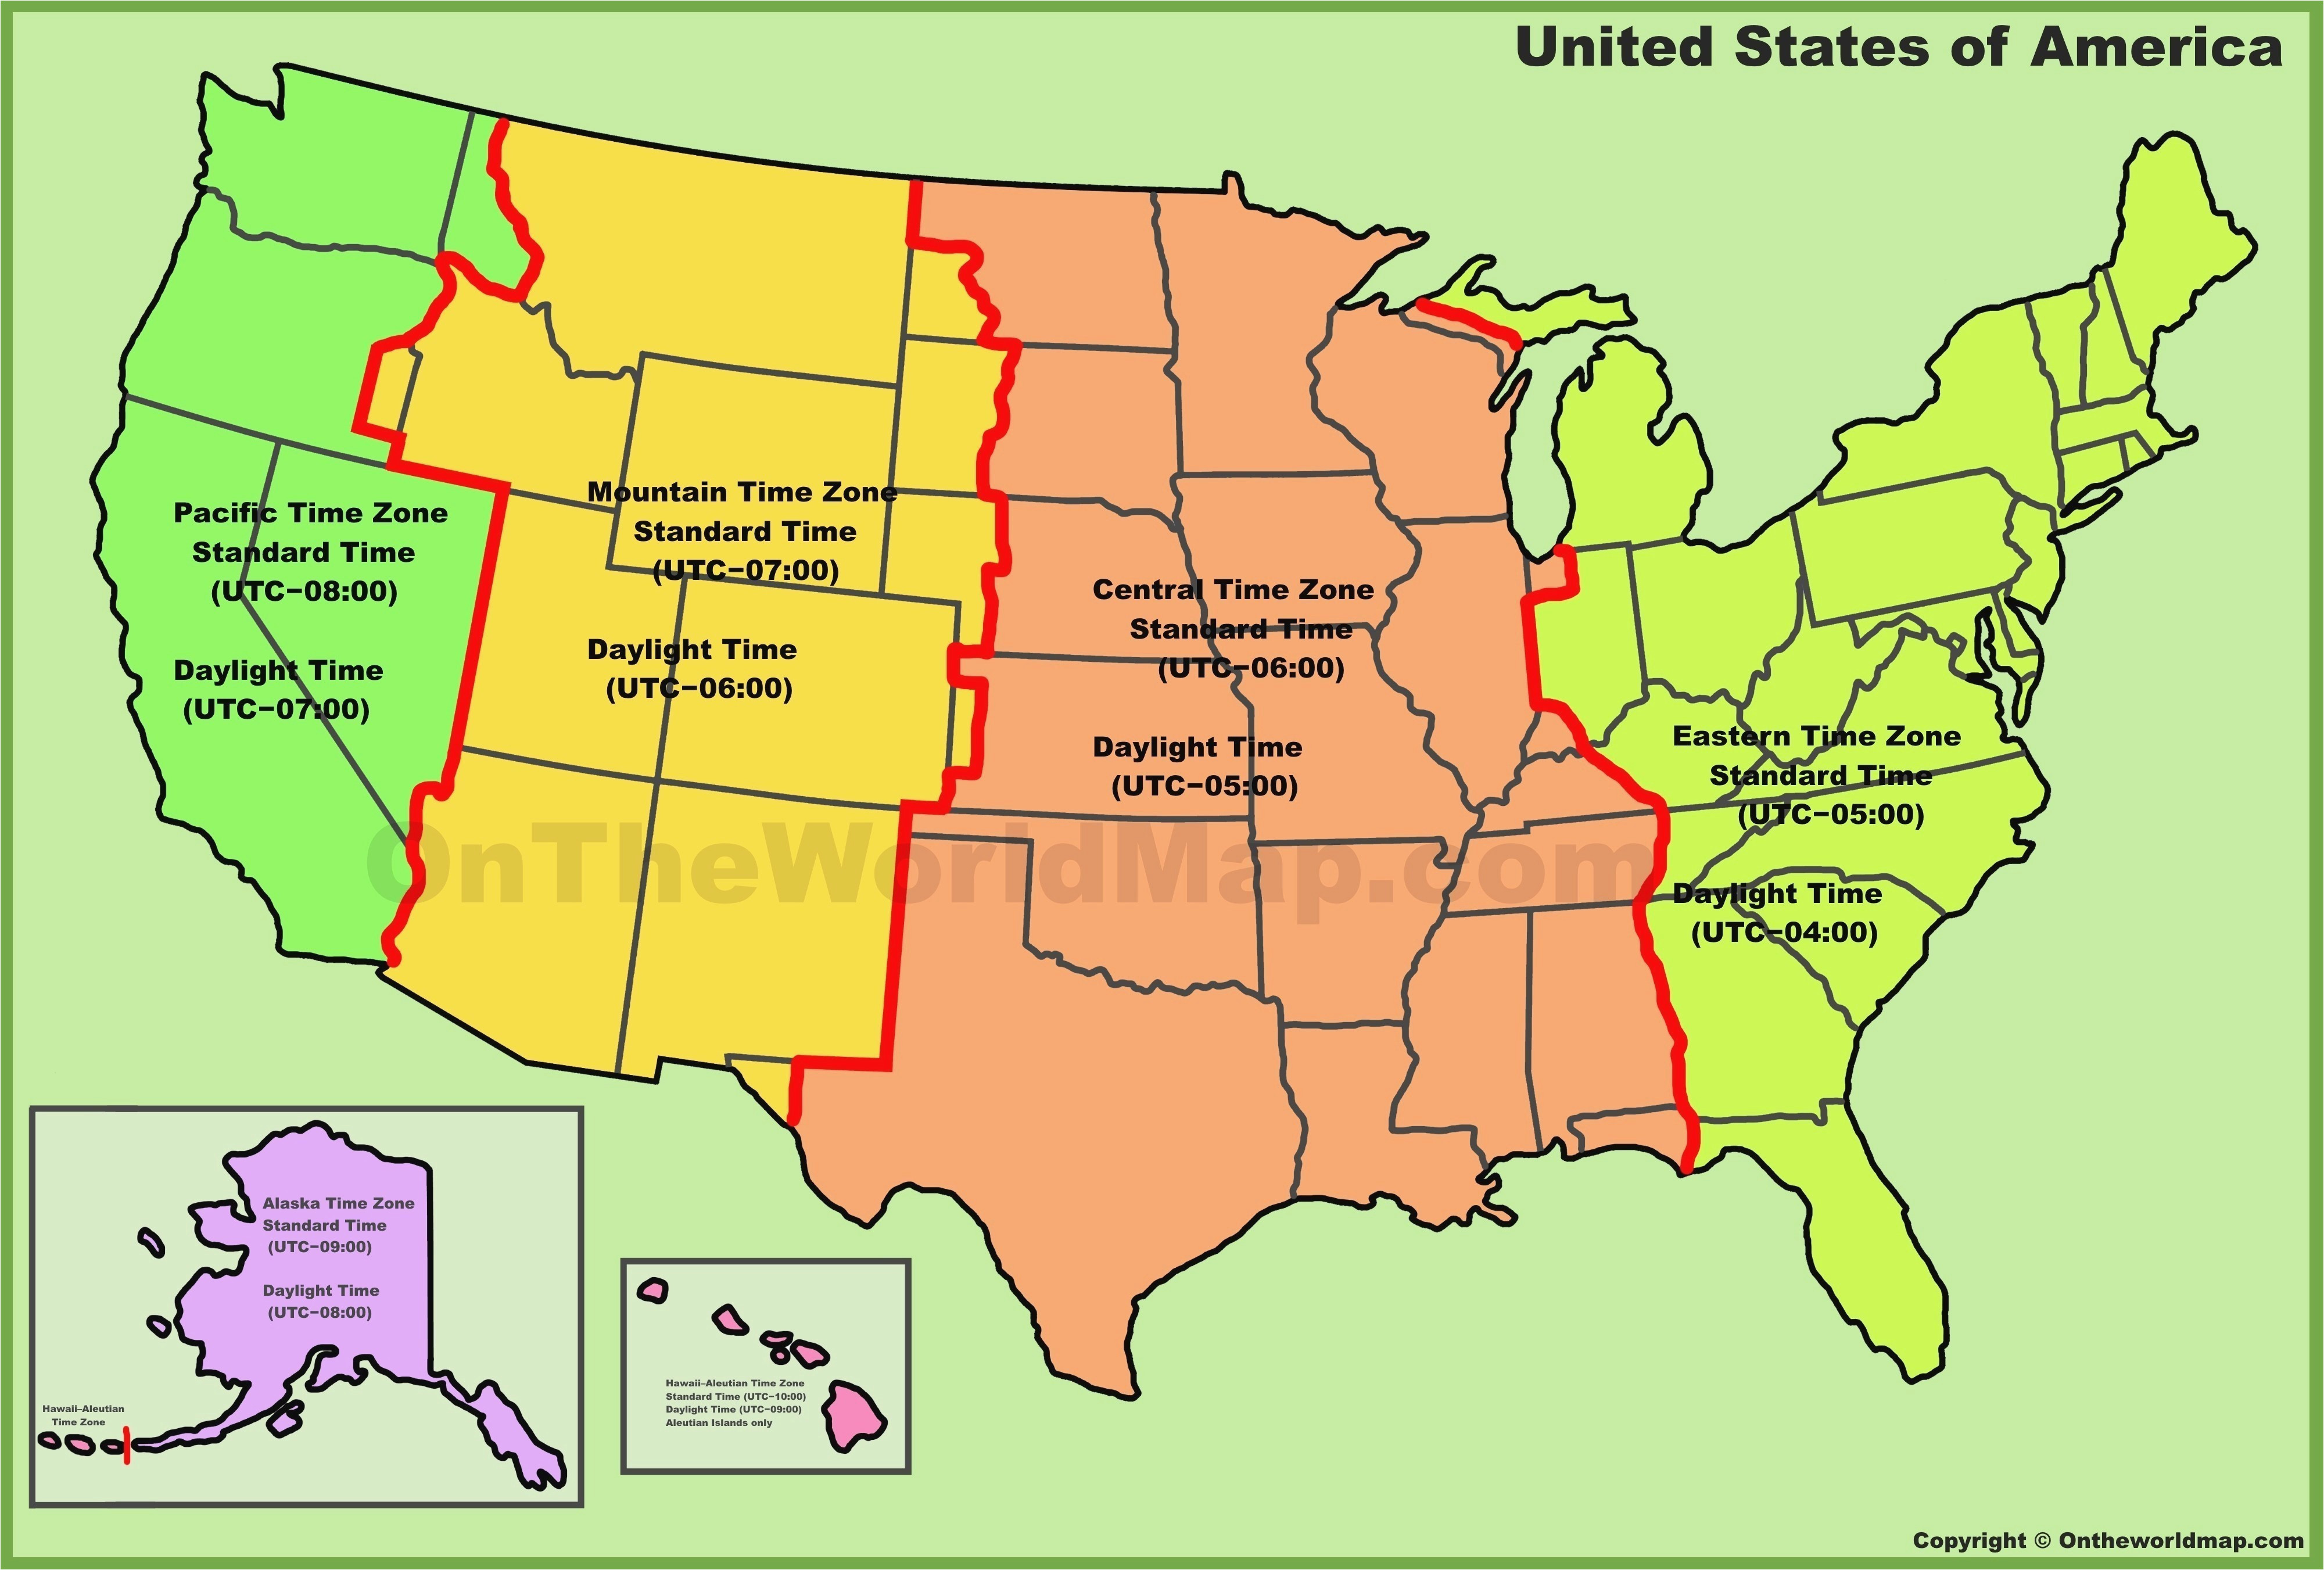 Ohio Time Zone Map United States Time Zone Map Florida New United States Zone Map Best